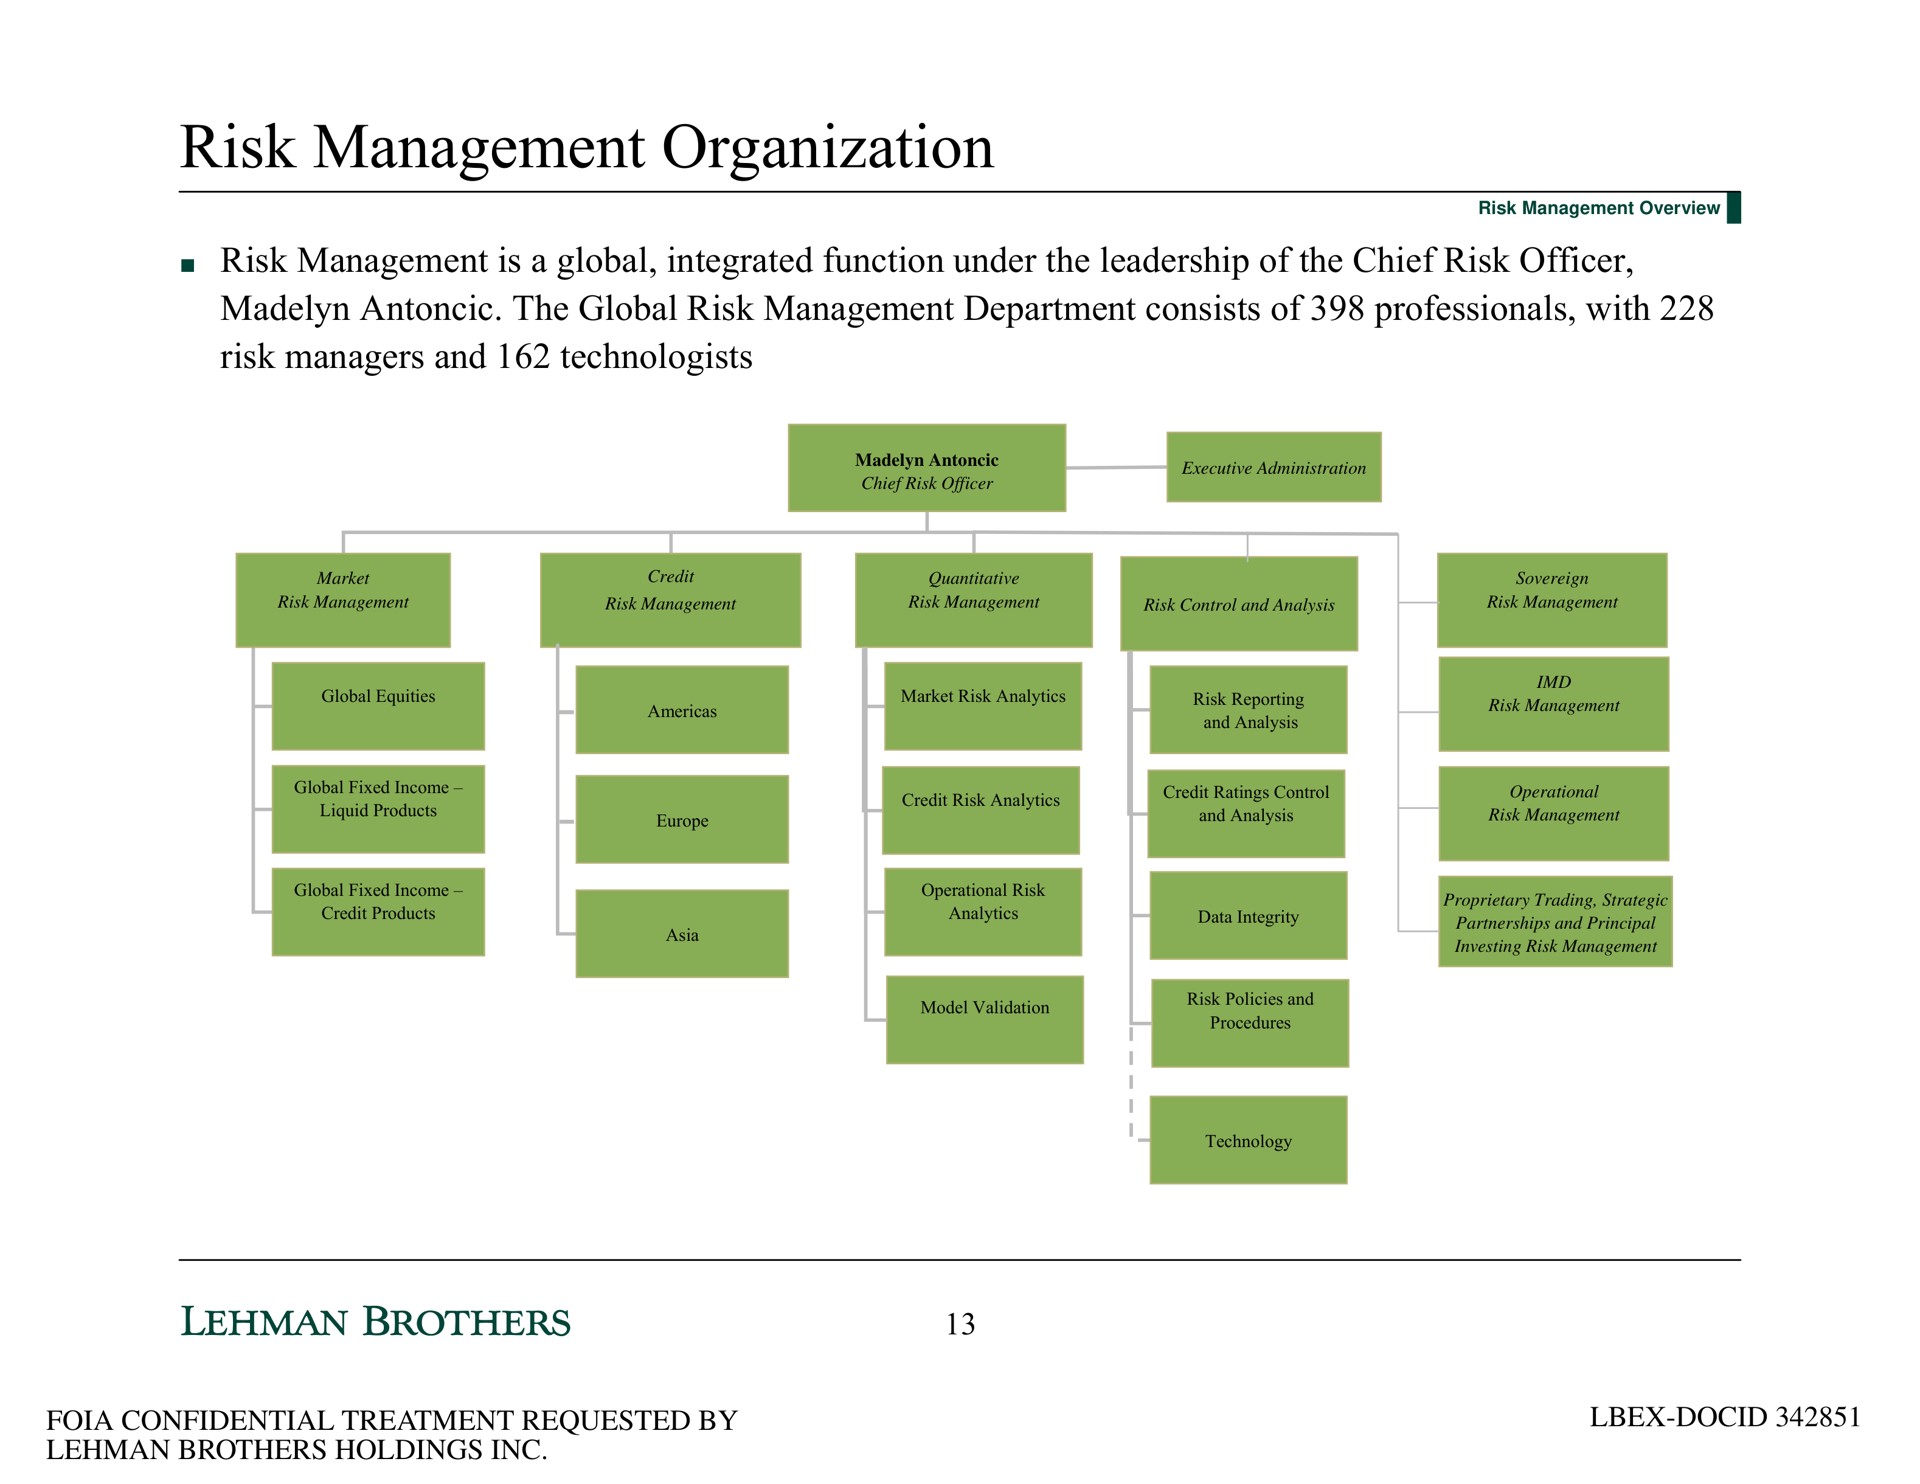 risk management organization risk management is a global integrated function under the leadership of the chief risk officer the global risk management department consists of professionals with risk managers and technologists | Lehman Brothers